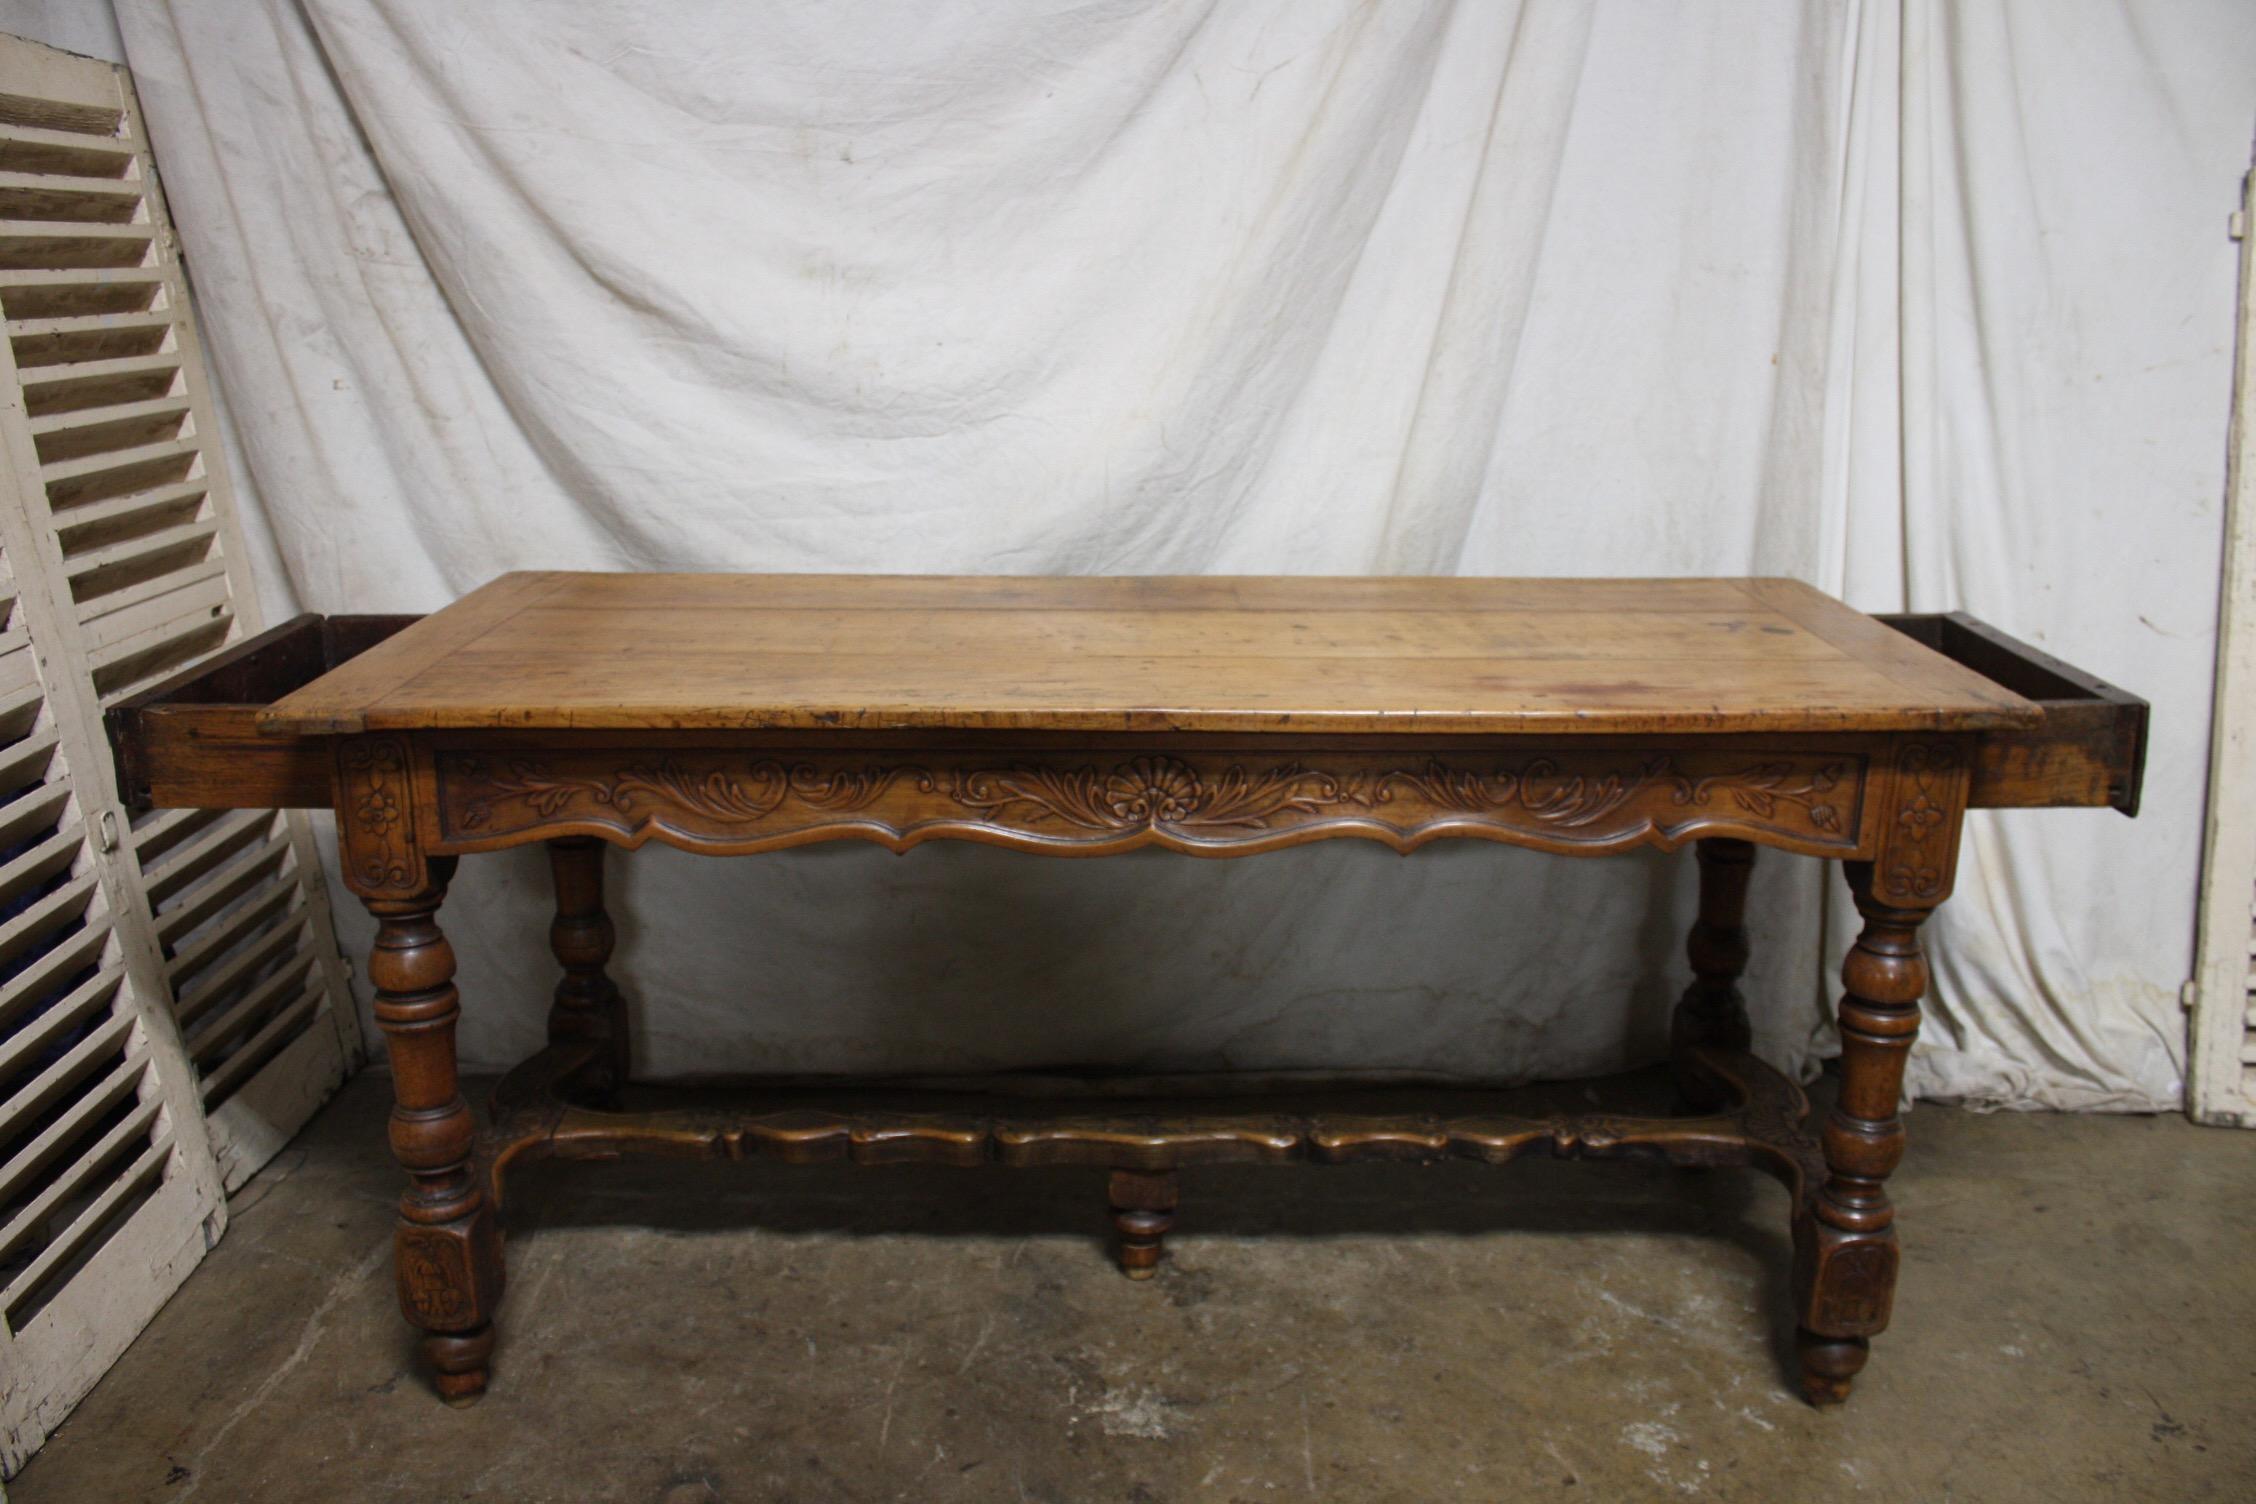 The wood wears a beautiful 18th century patine with all the history on the top. This table has a lot of character, thick drawers on each side and a 5th feet at the center, very different.